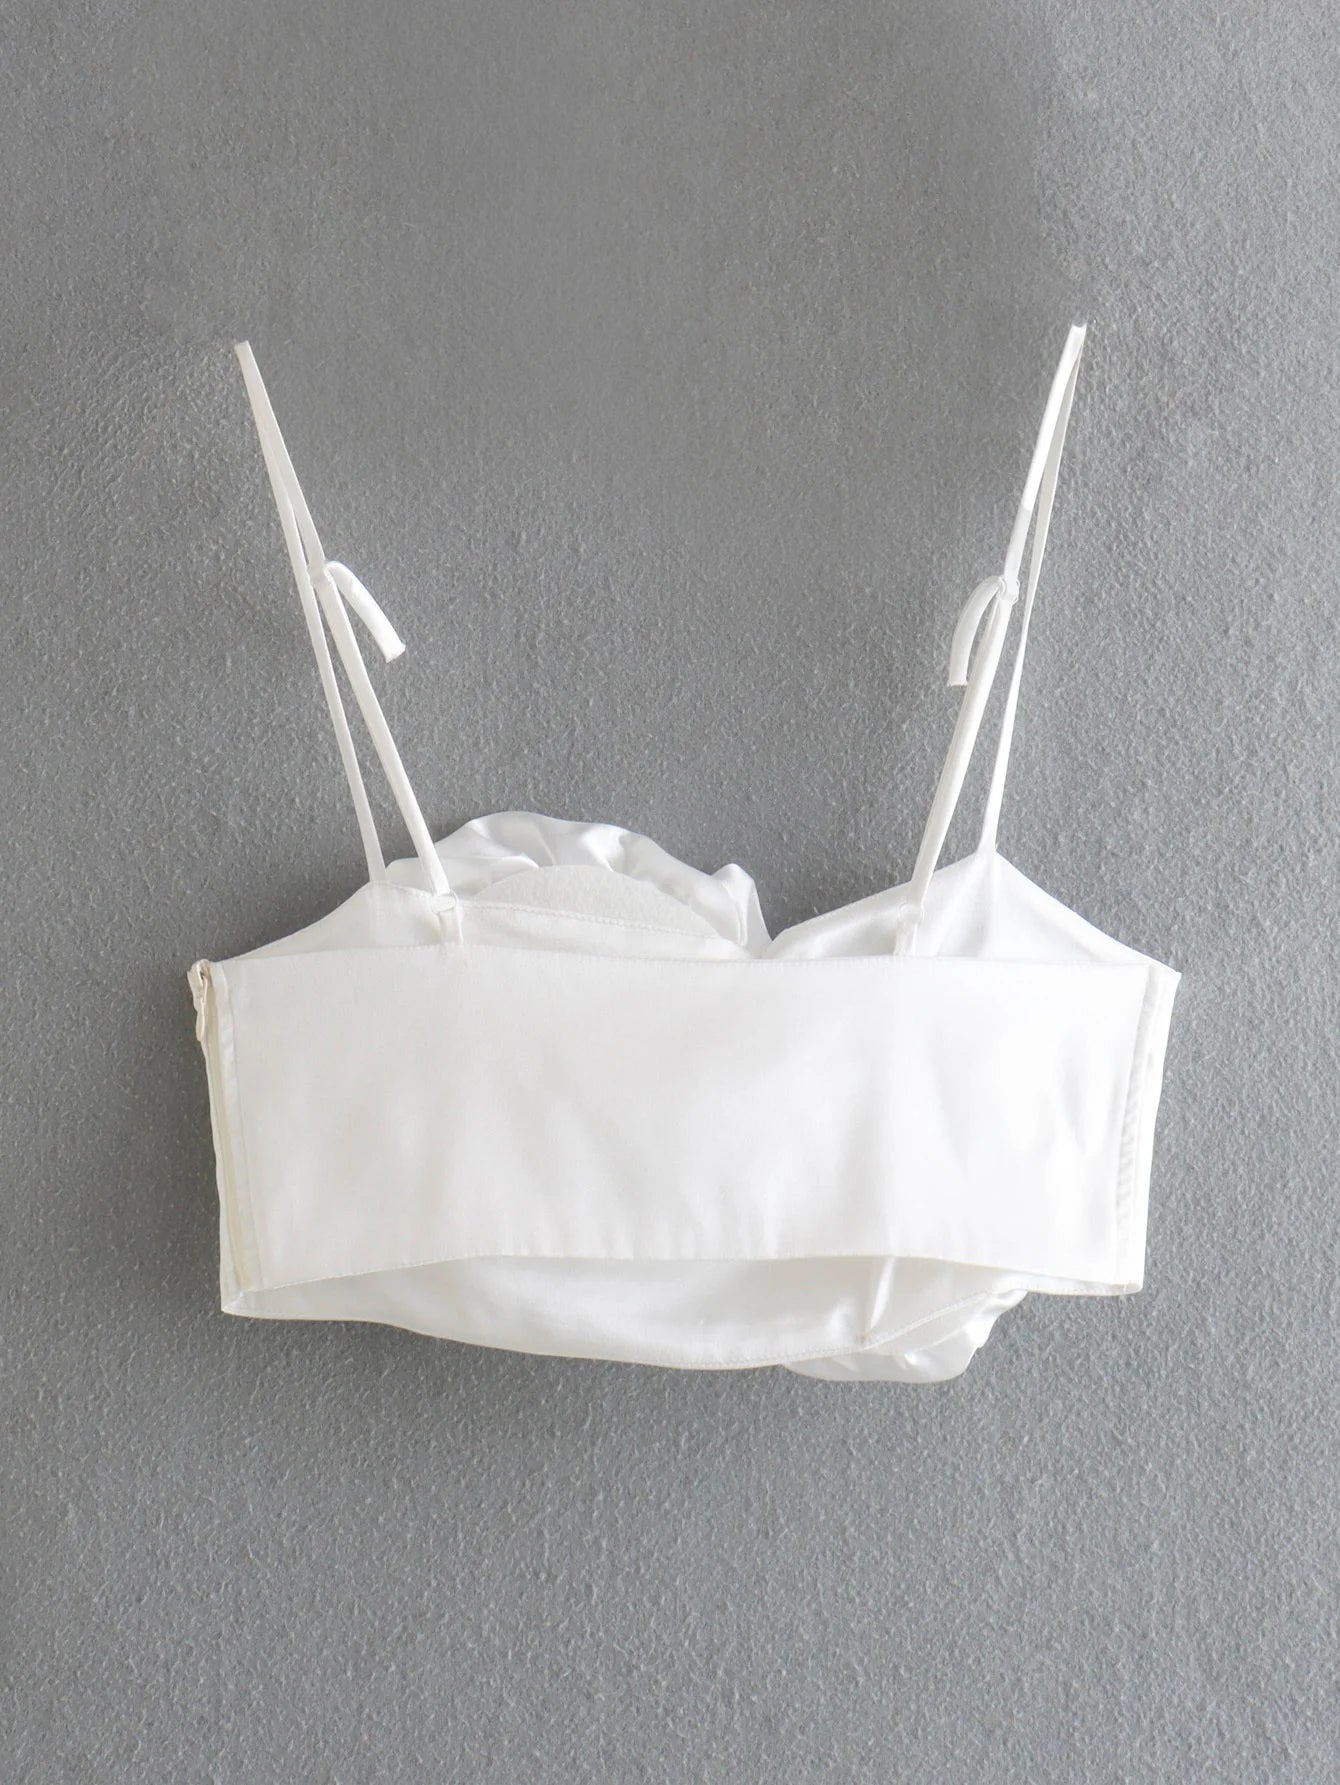 White Spaghetti Strap Tops: Sleek and summery tops featuring delicate spaghetti straps in a crisp white color, perfect for warm-weather styling.